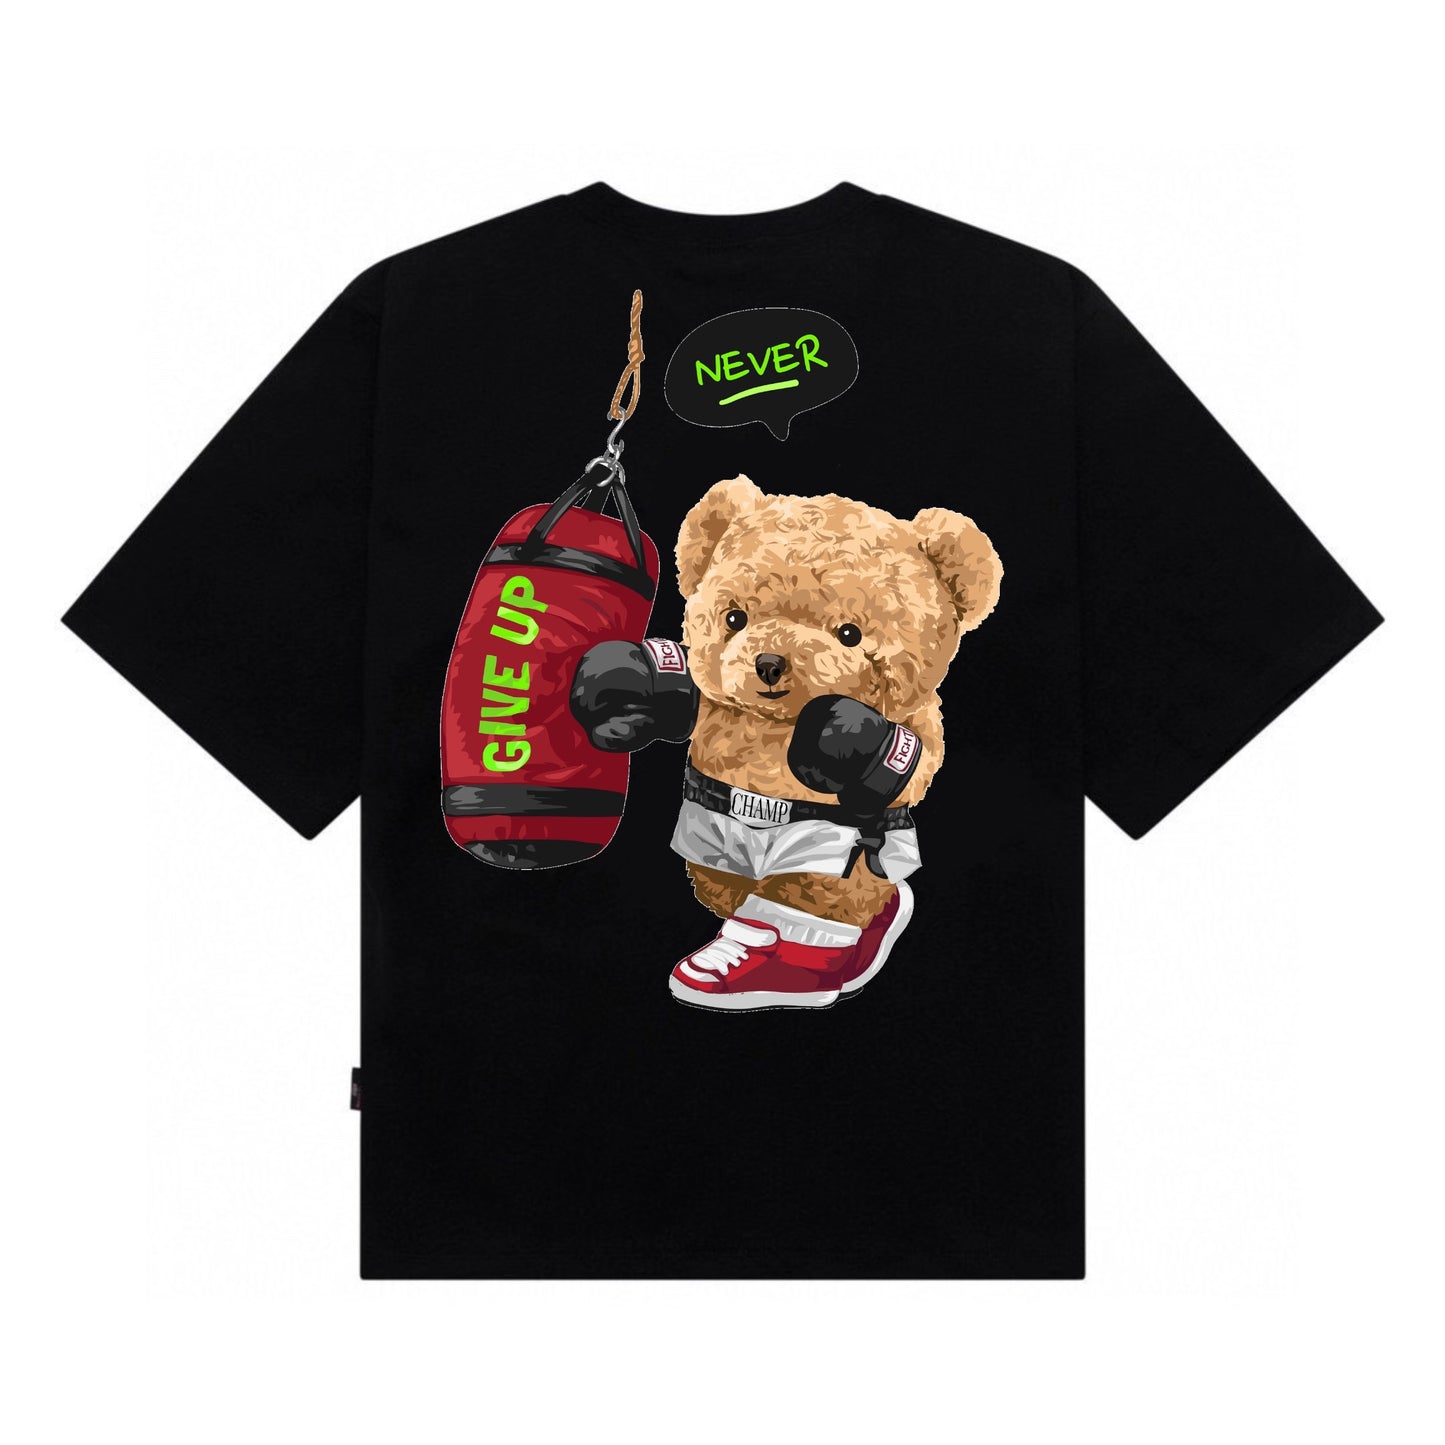 Etiquette Oversized T-Shirt - [0151] Never Give Up Teddy Bear